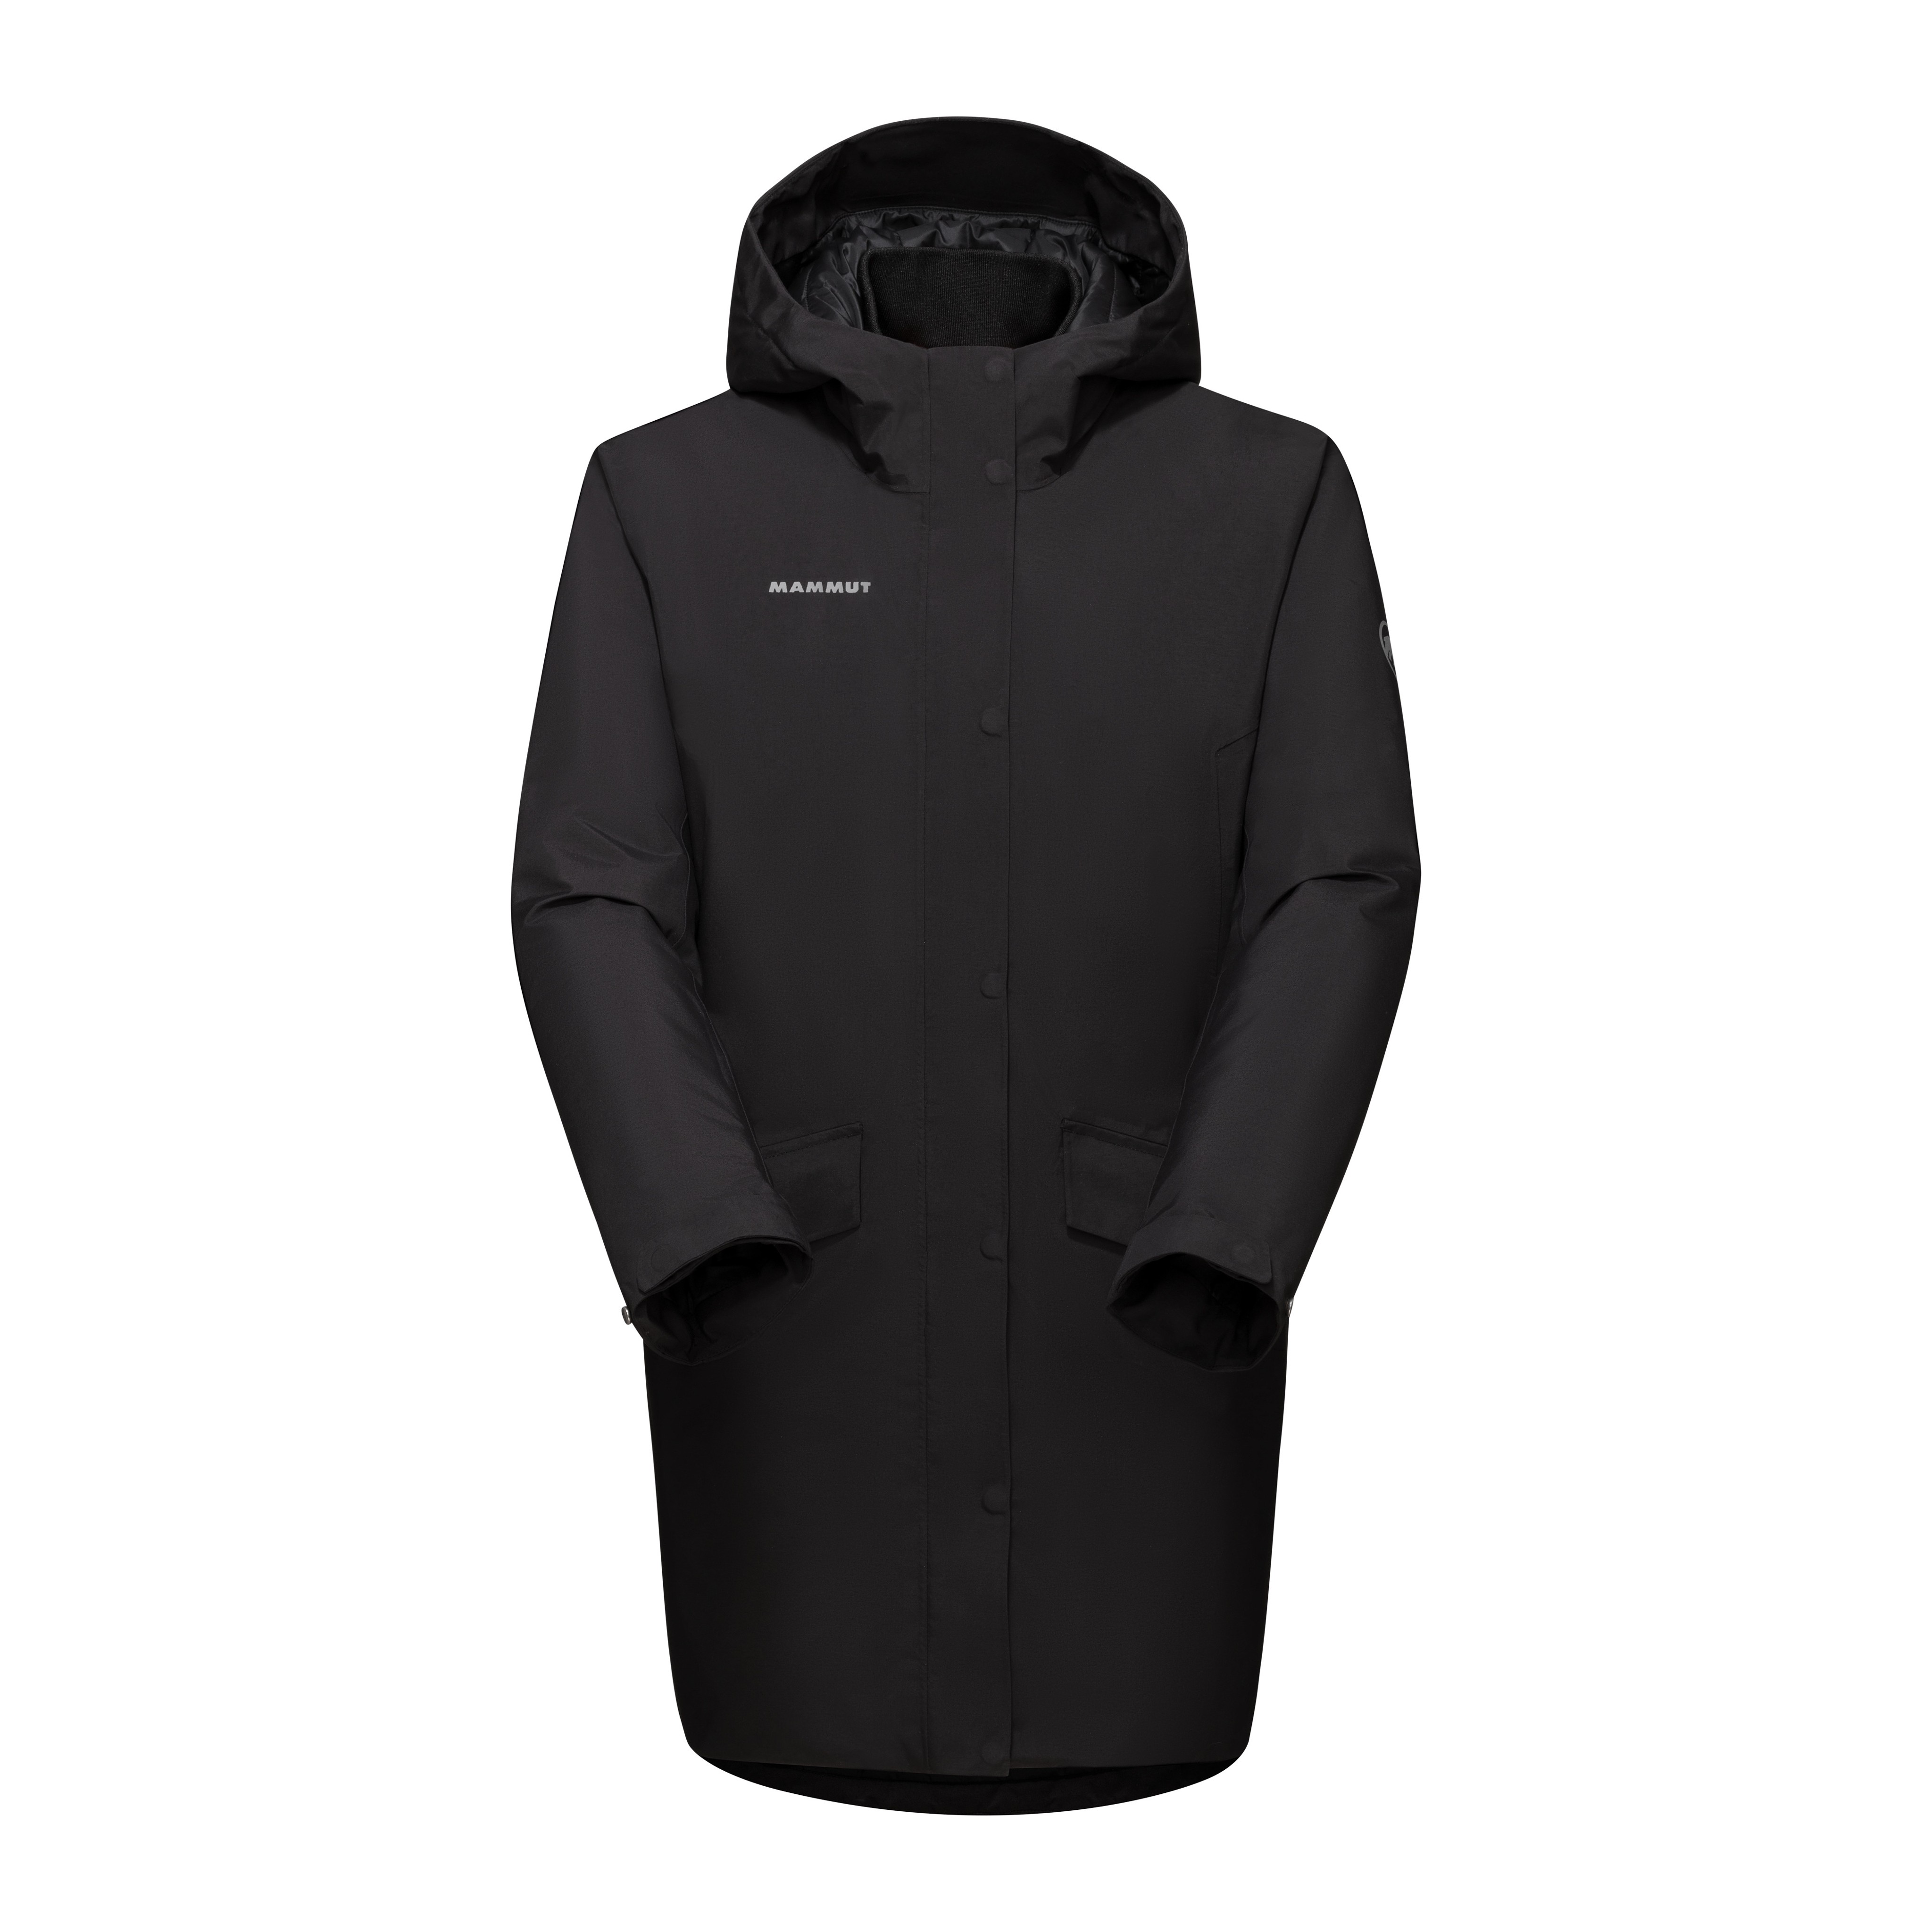 Chamuera HS Thermo Hooded Parka Women - black, XS product image